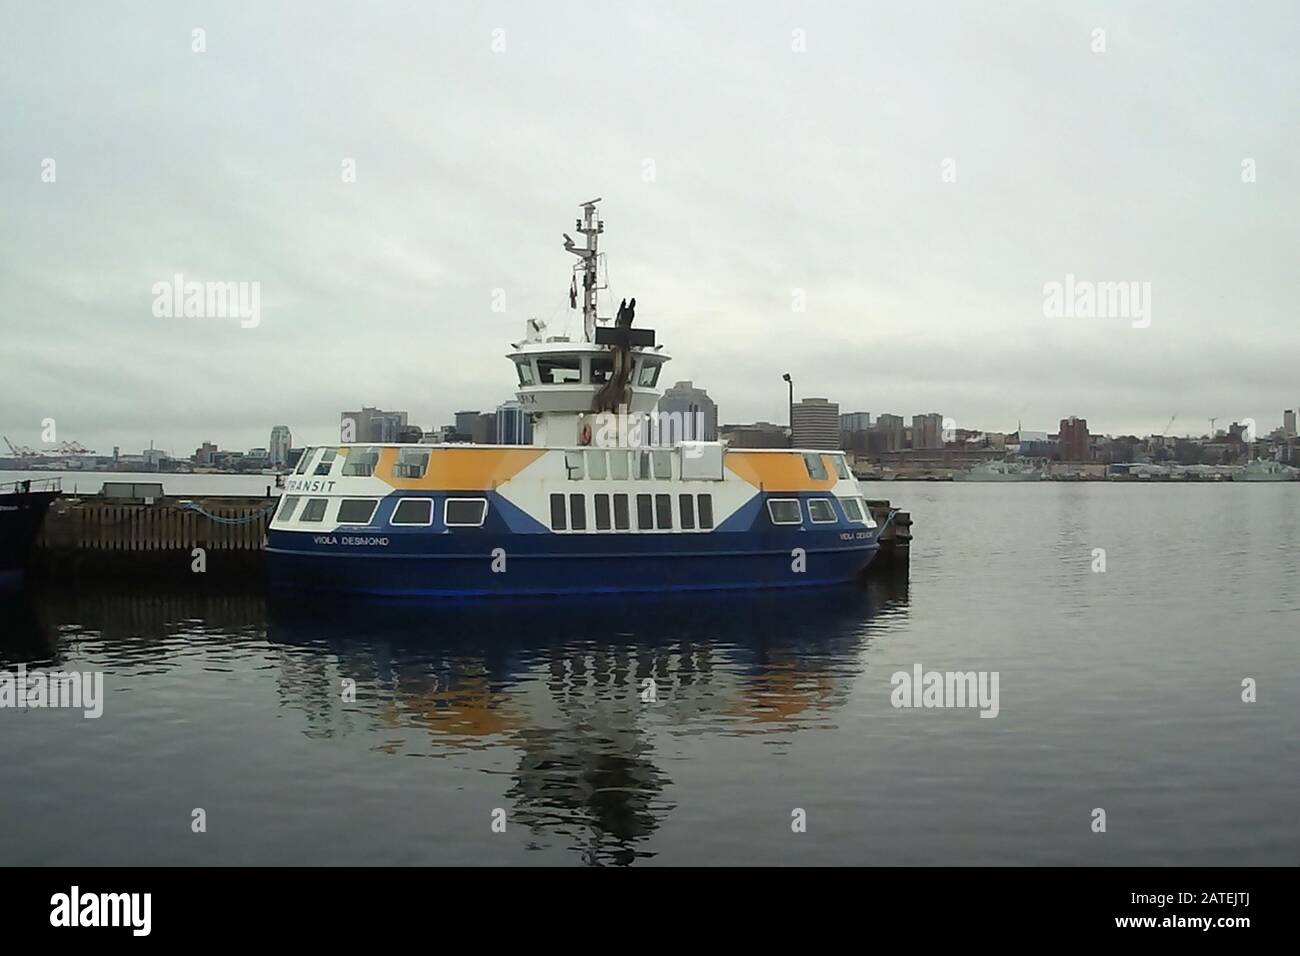 Dartmouth, Nova Scotia- February 1, 2020: The new ferry fleet named the Viola Desmond is moored at Alderney Landing in Dartmouth Stock Photo